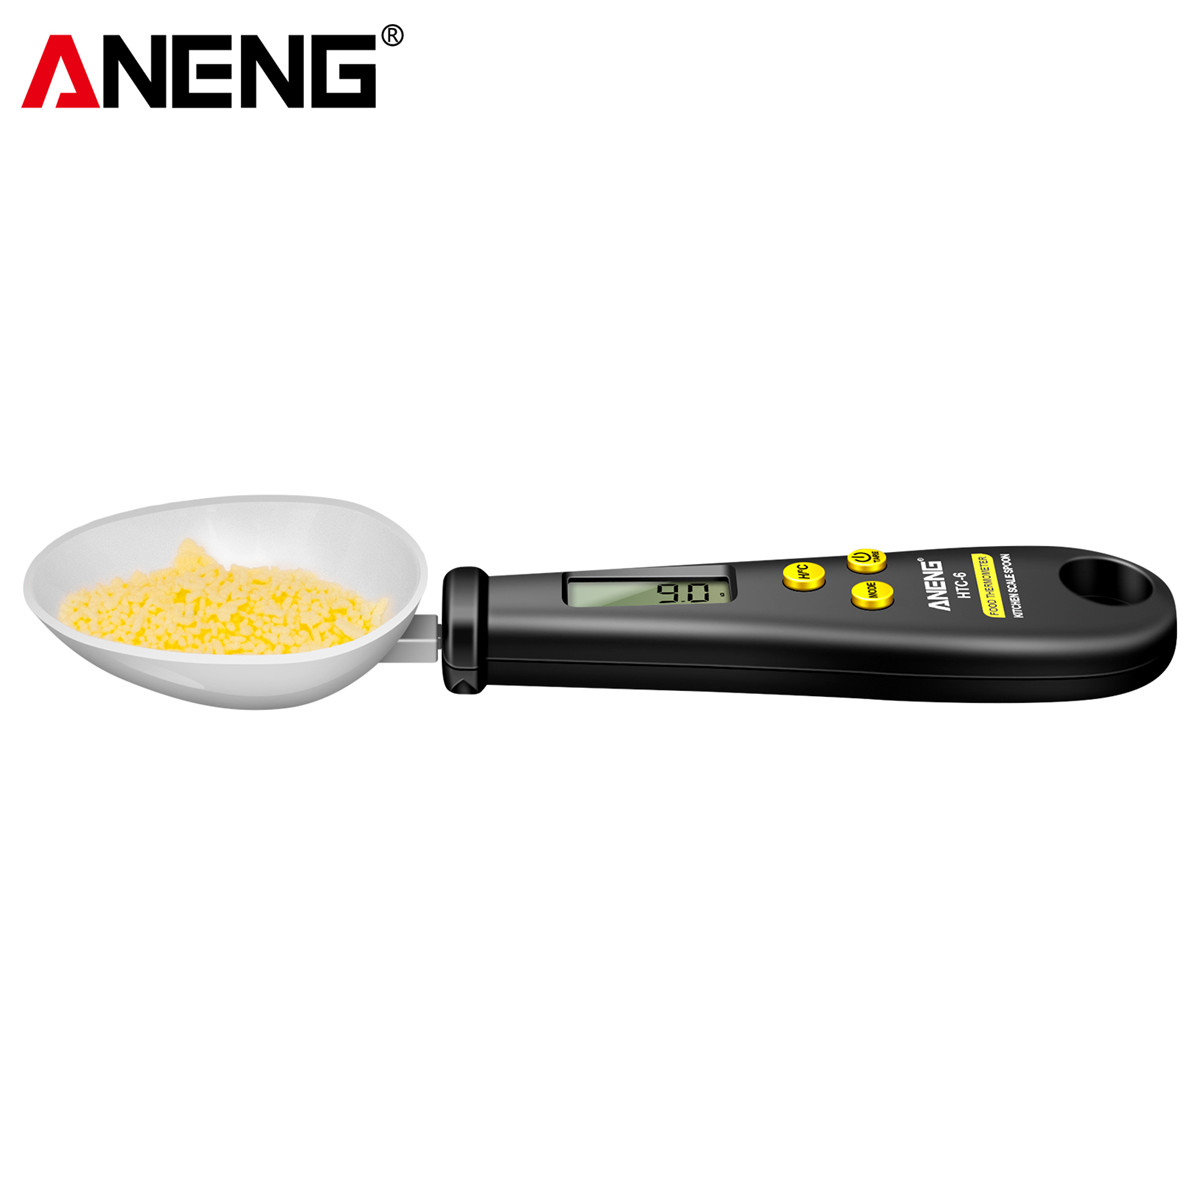 ANENG HTC-6 Multifunctional Kitchen Tool Electronic Weighing Spoon with Integrated Food Thermometer Precise Gram/Ounce/Pound Conversion Durable ABS and Stainless Steel